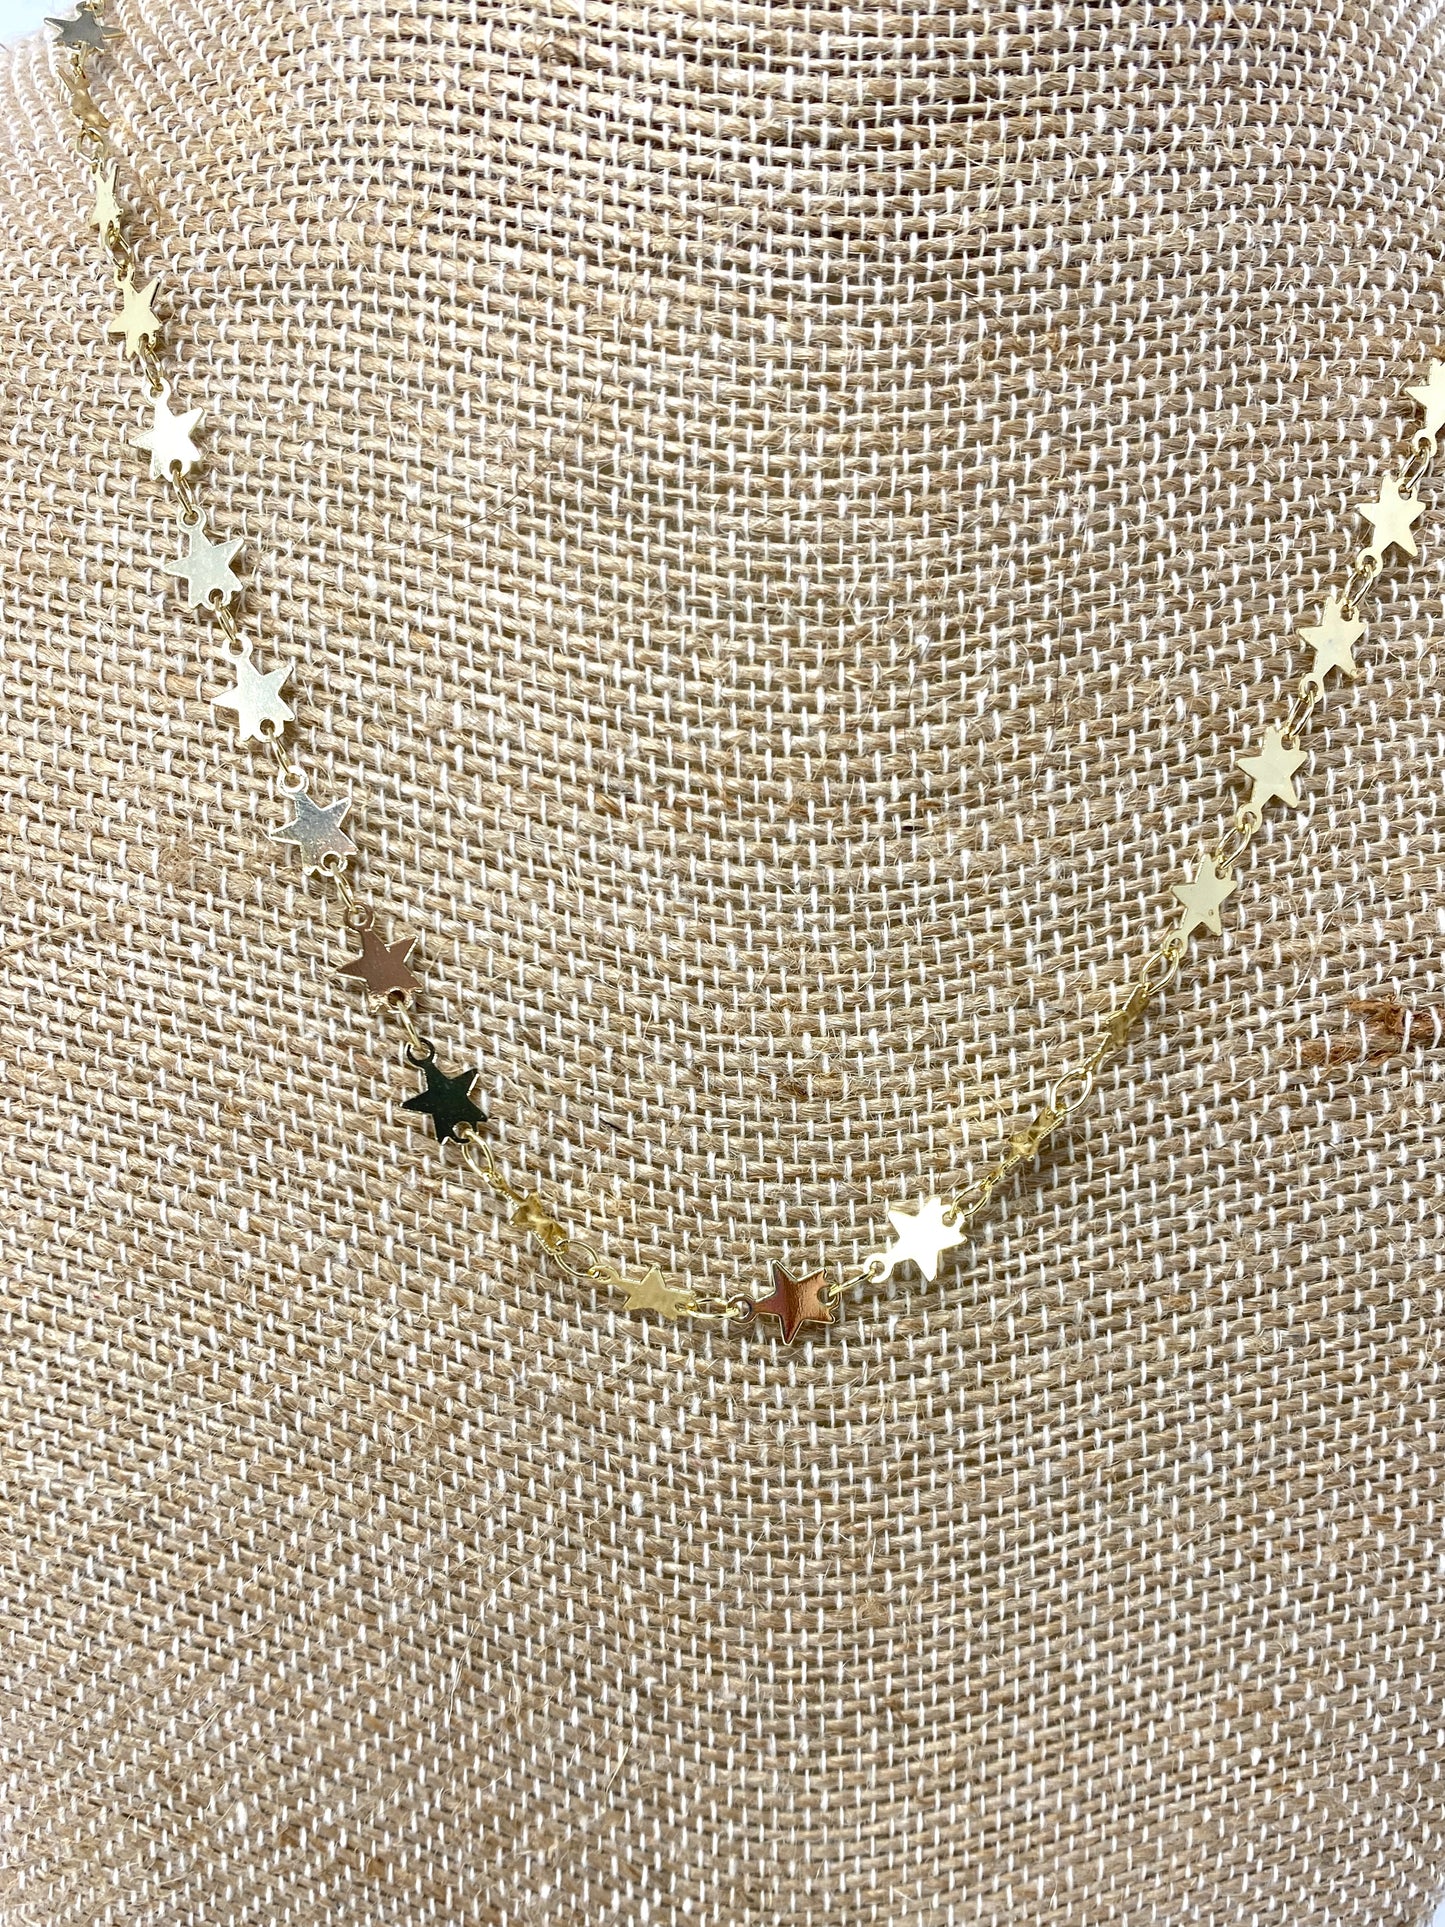 Gold Filled Star Necklace